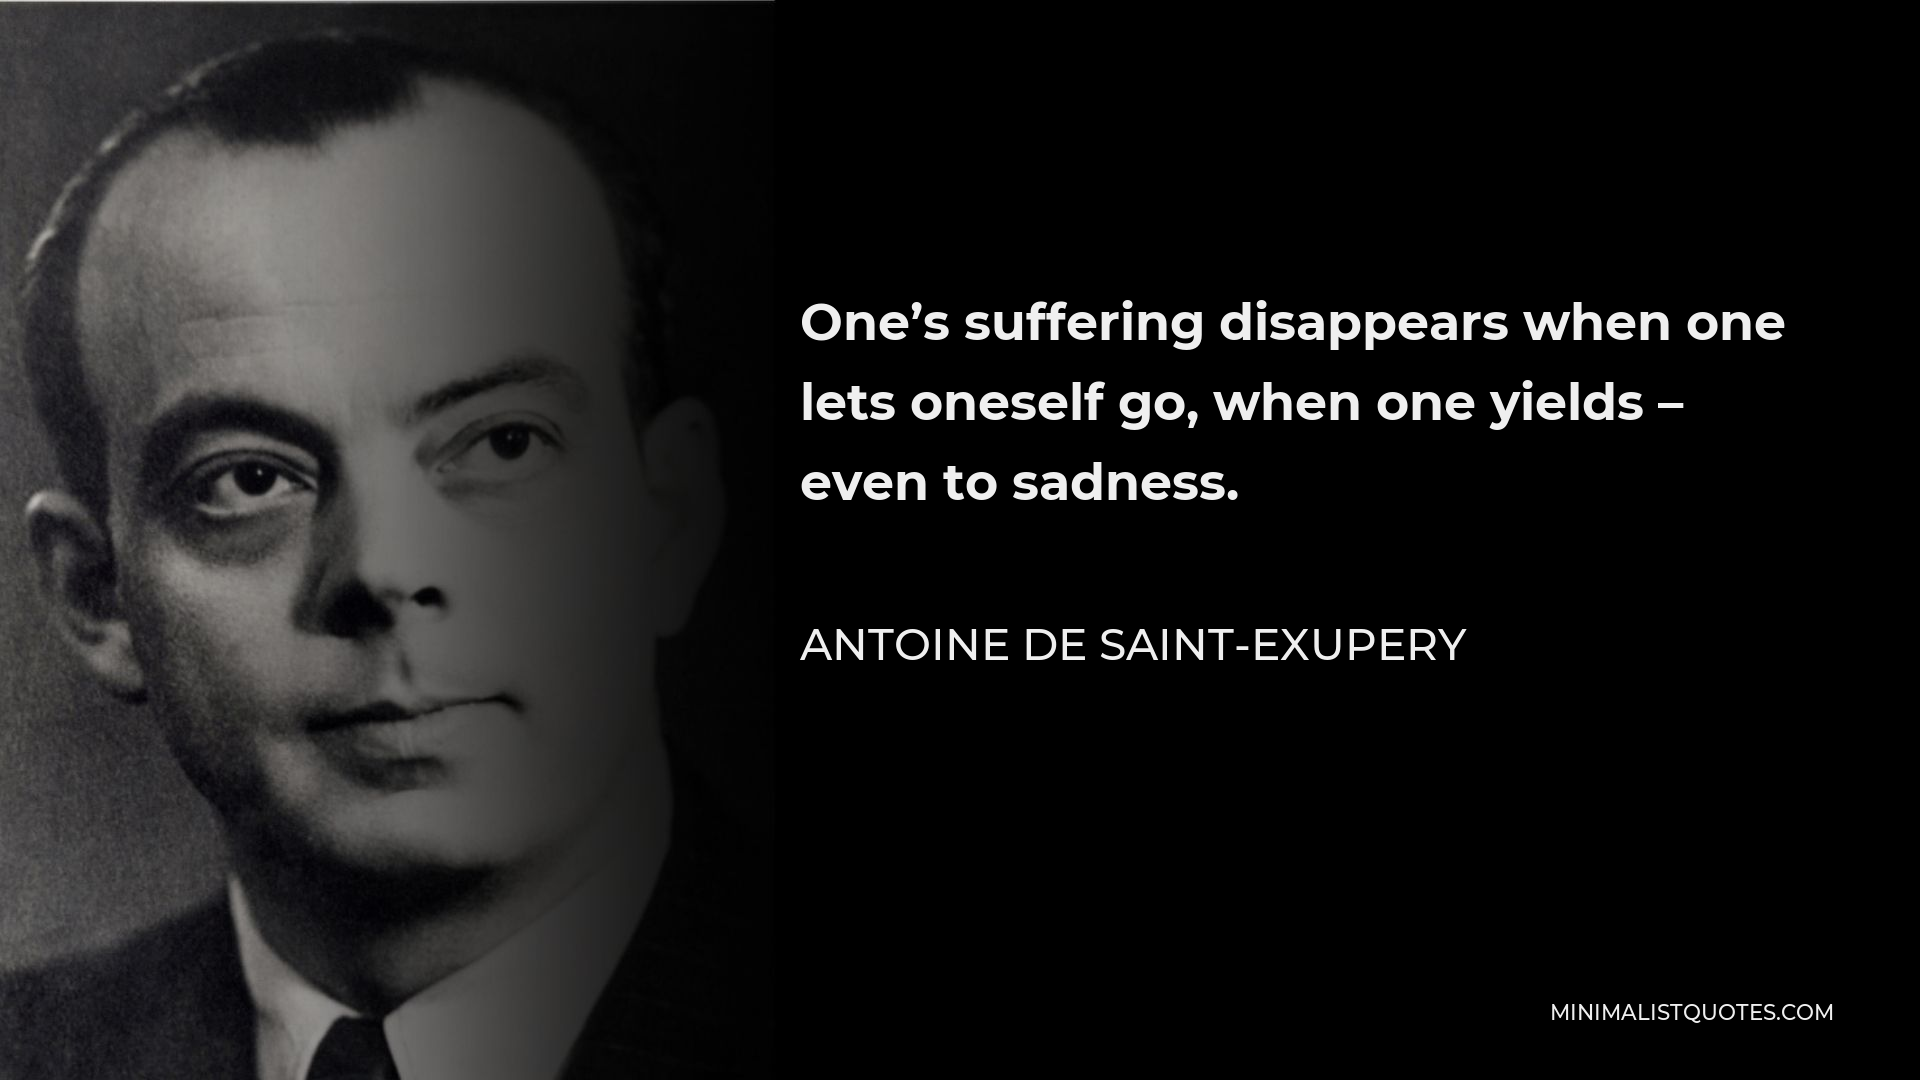 Antoine de Saint-Exupery Quote - One’s suffering disappears when one lets oneself go, when one yields – even to sadness.